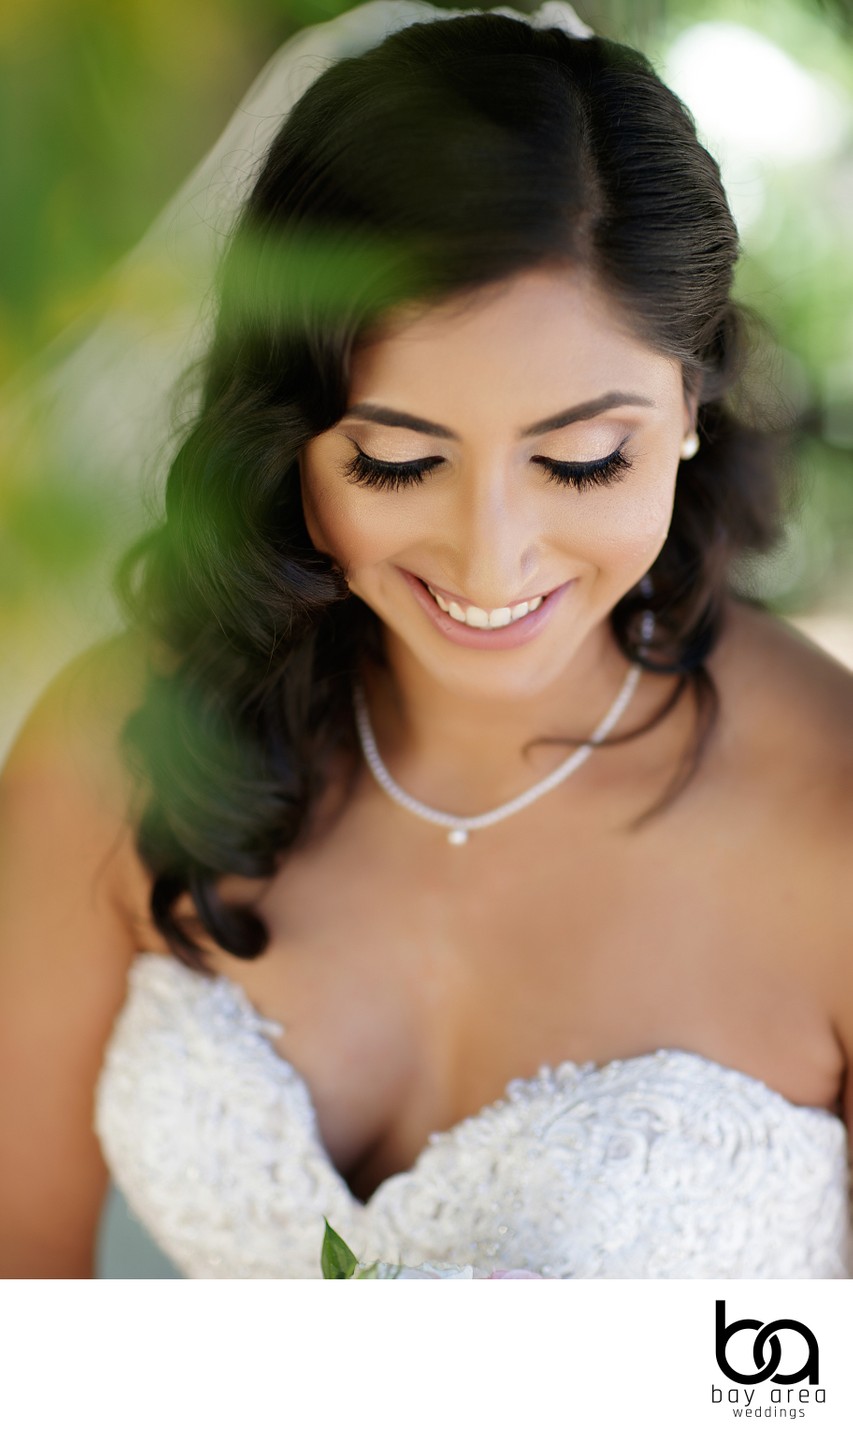 Best Wedding Bride Photography in the Bay Area